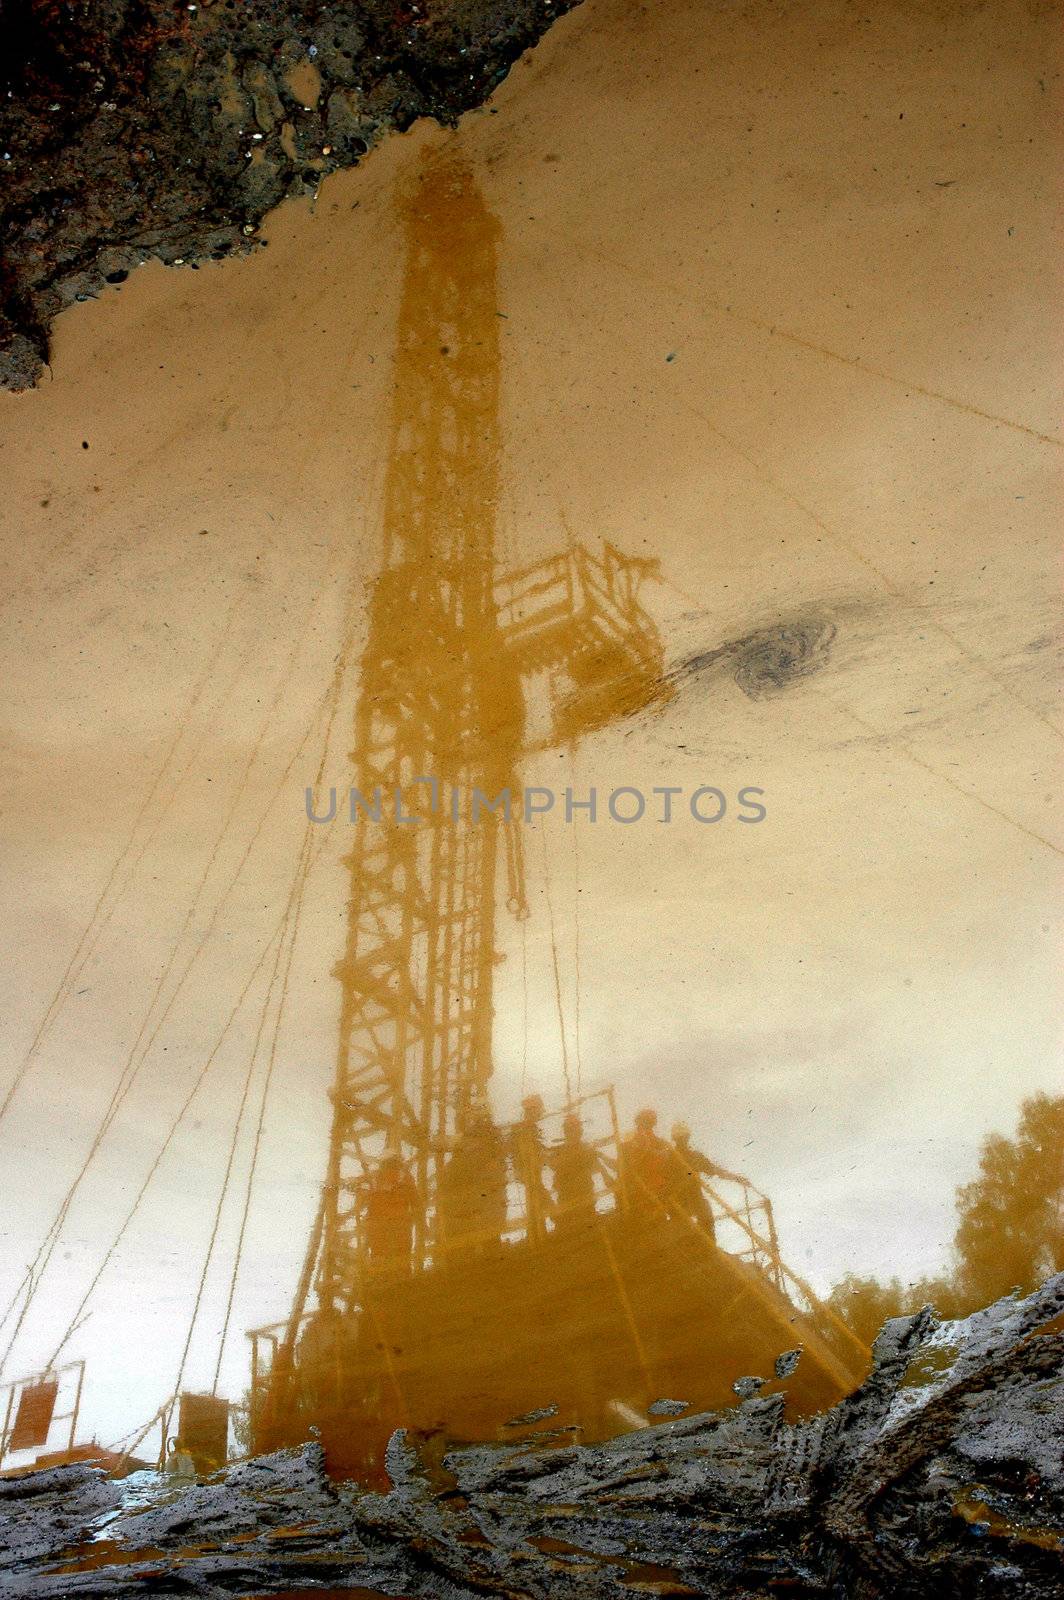 reflection of petroleum miners in the mining area